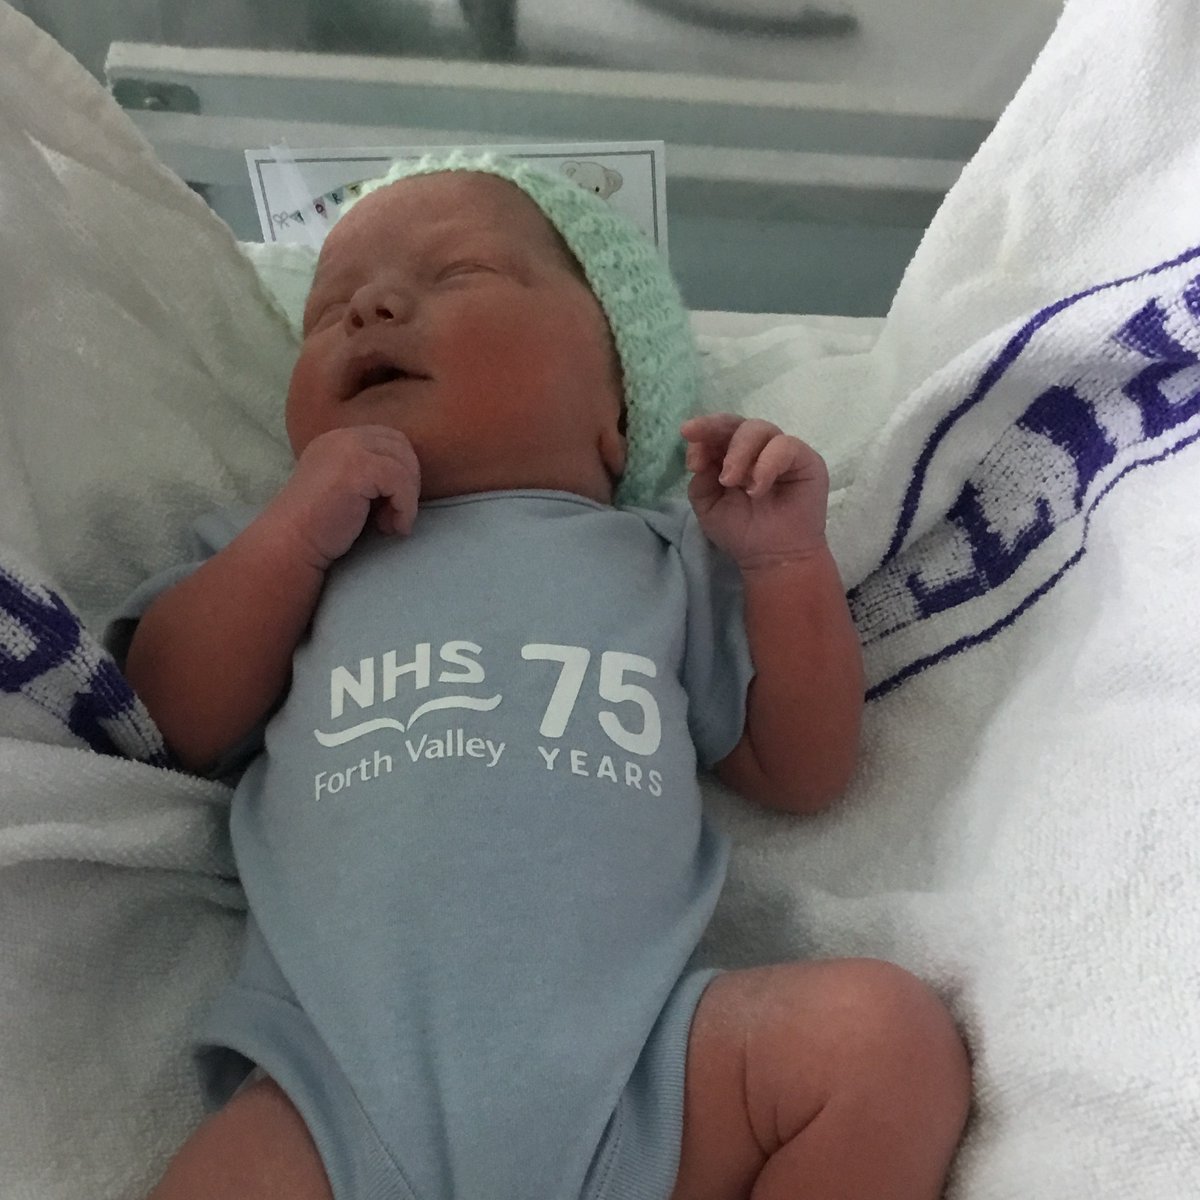 To mark the 75th anniversary of the NHS, special baby vests are being given to every baby born at Forth Valley Royal Hospital today 💙 #nhsscot75